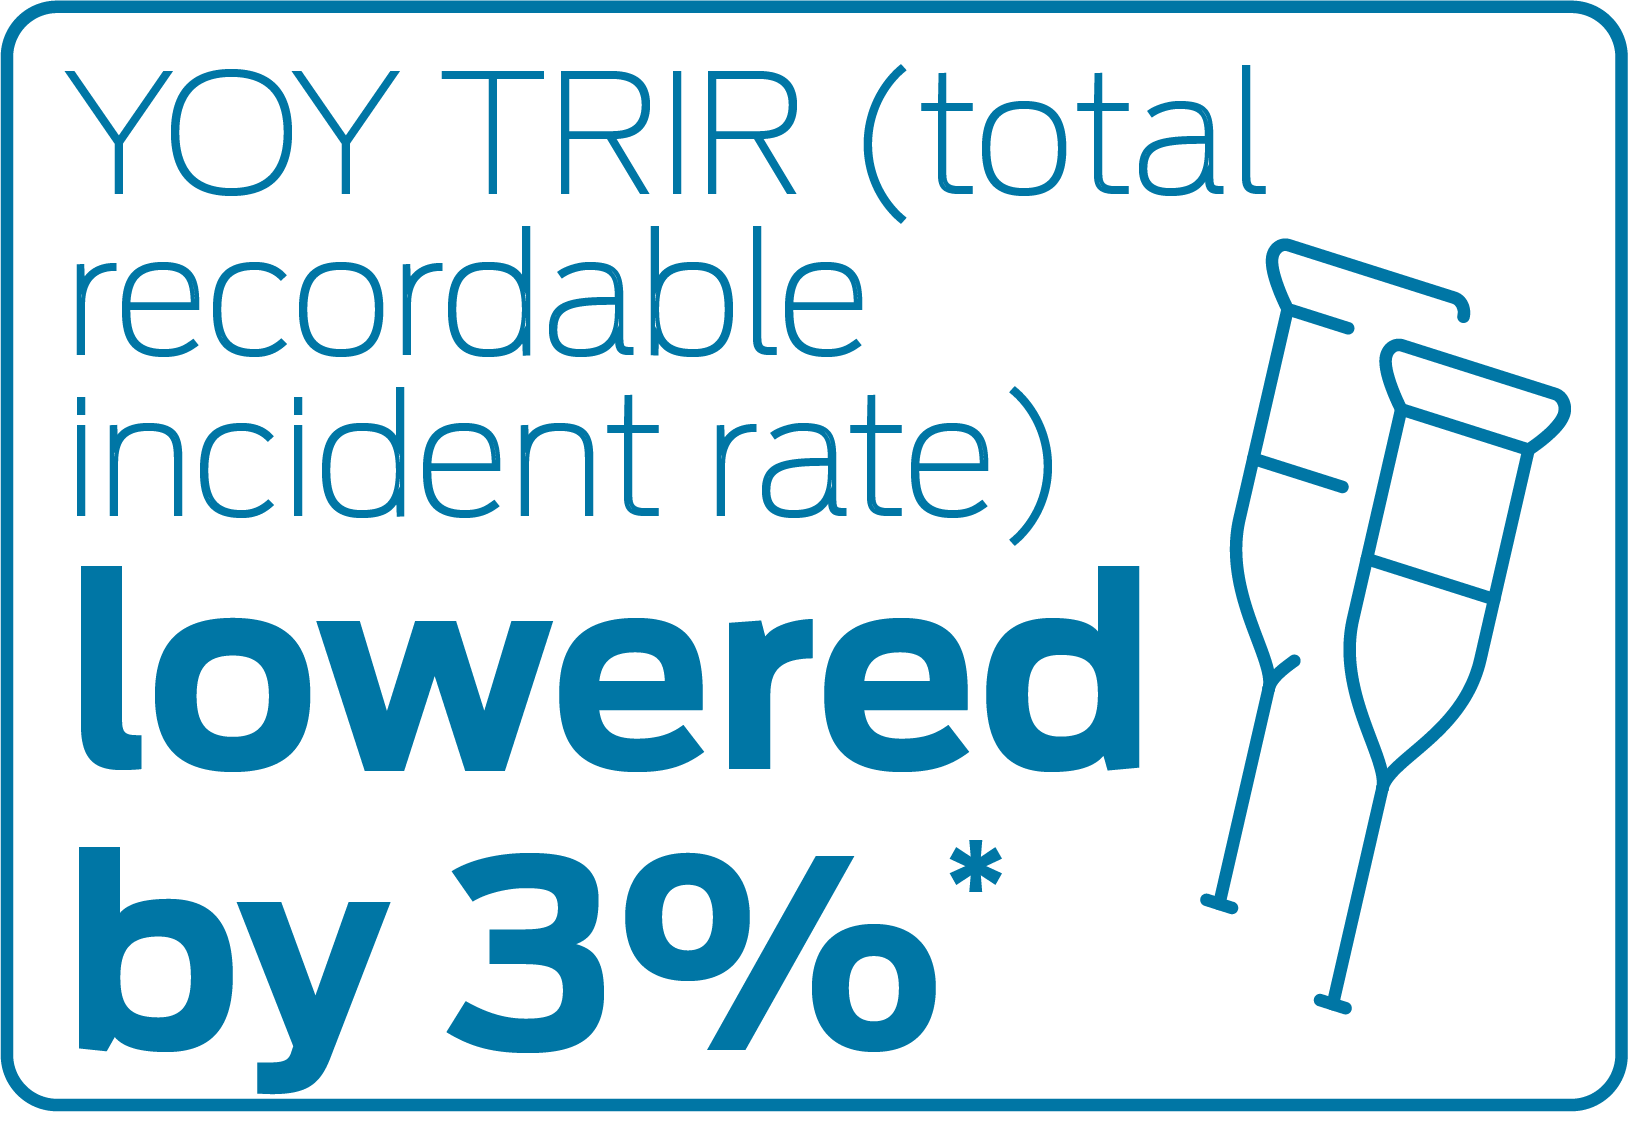 Total recordable incident rate (TRIR) lowered by 3%